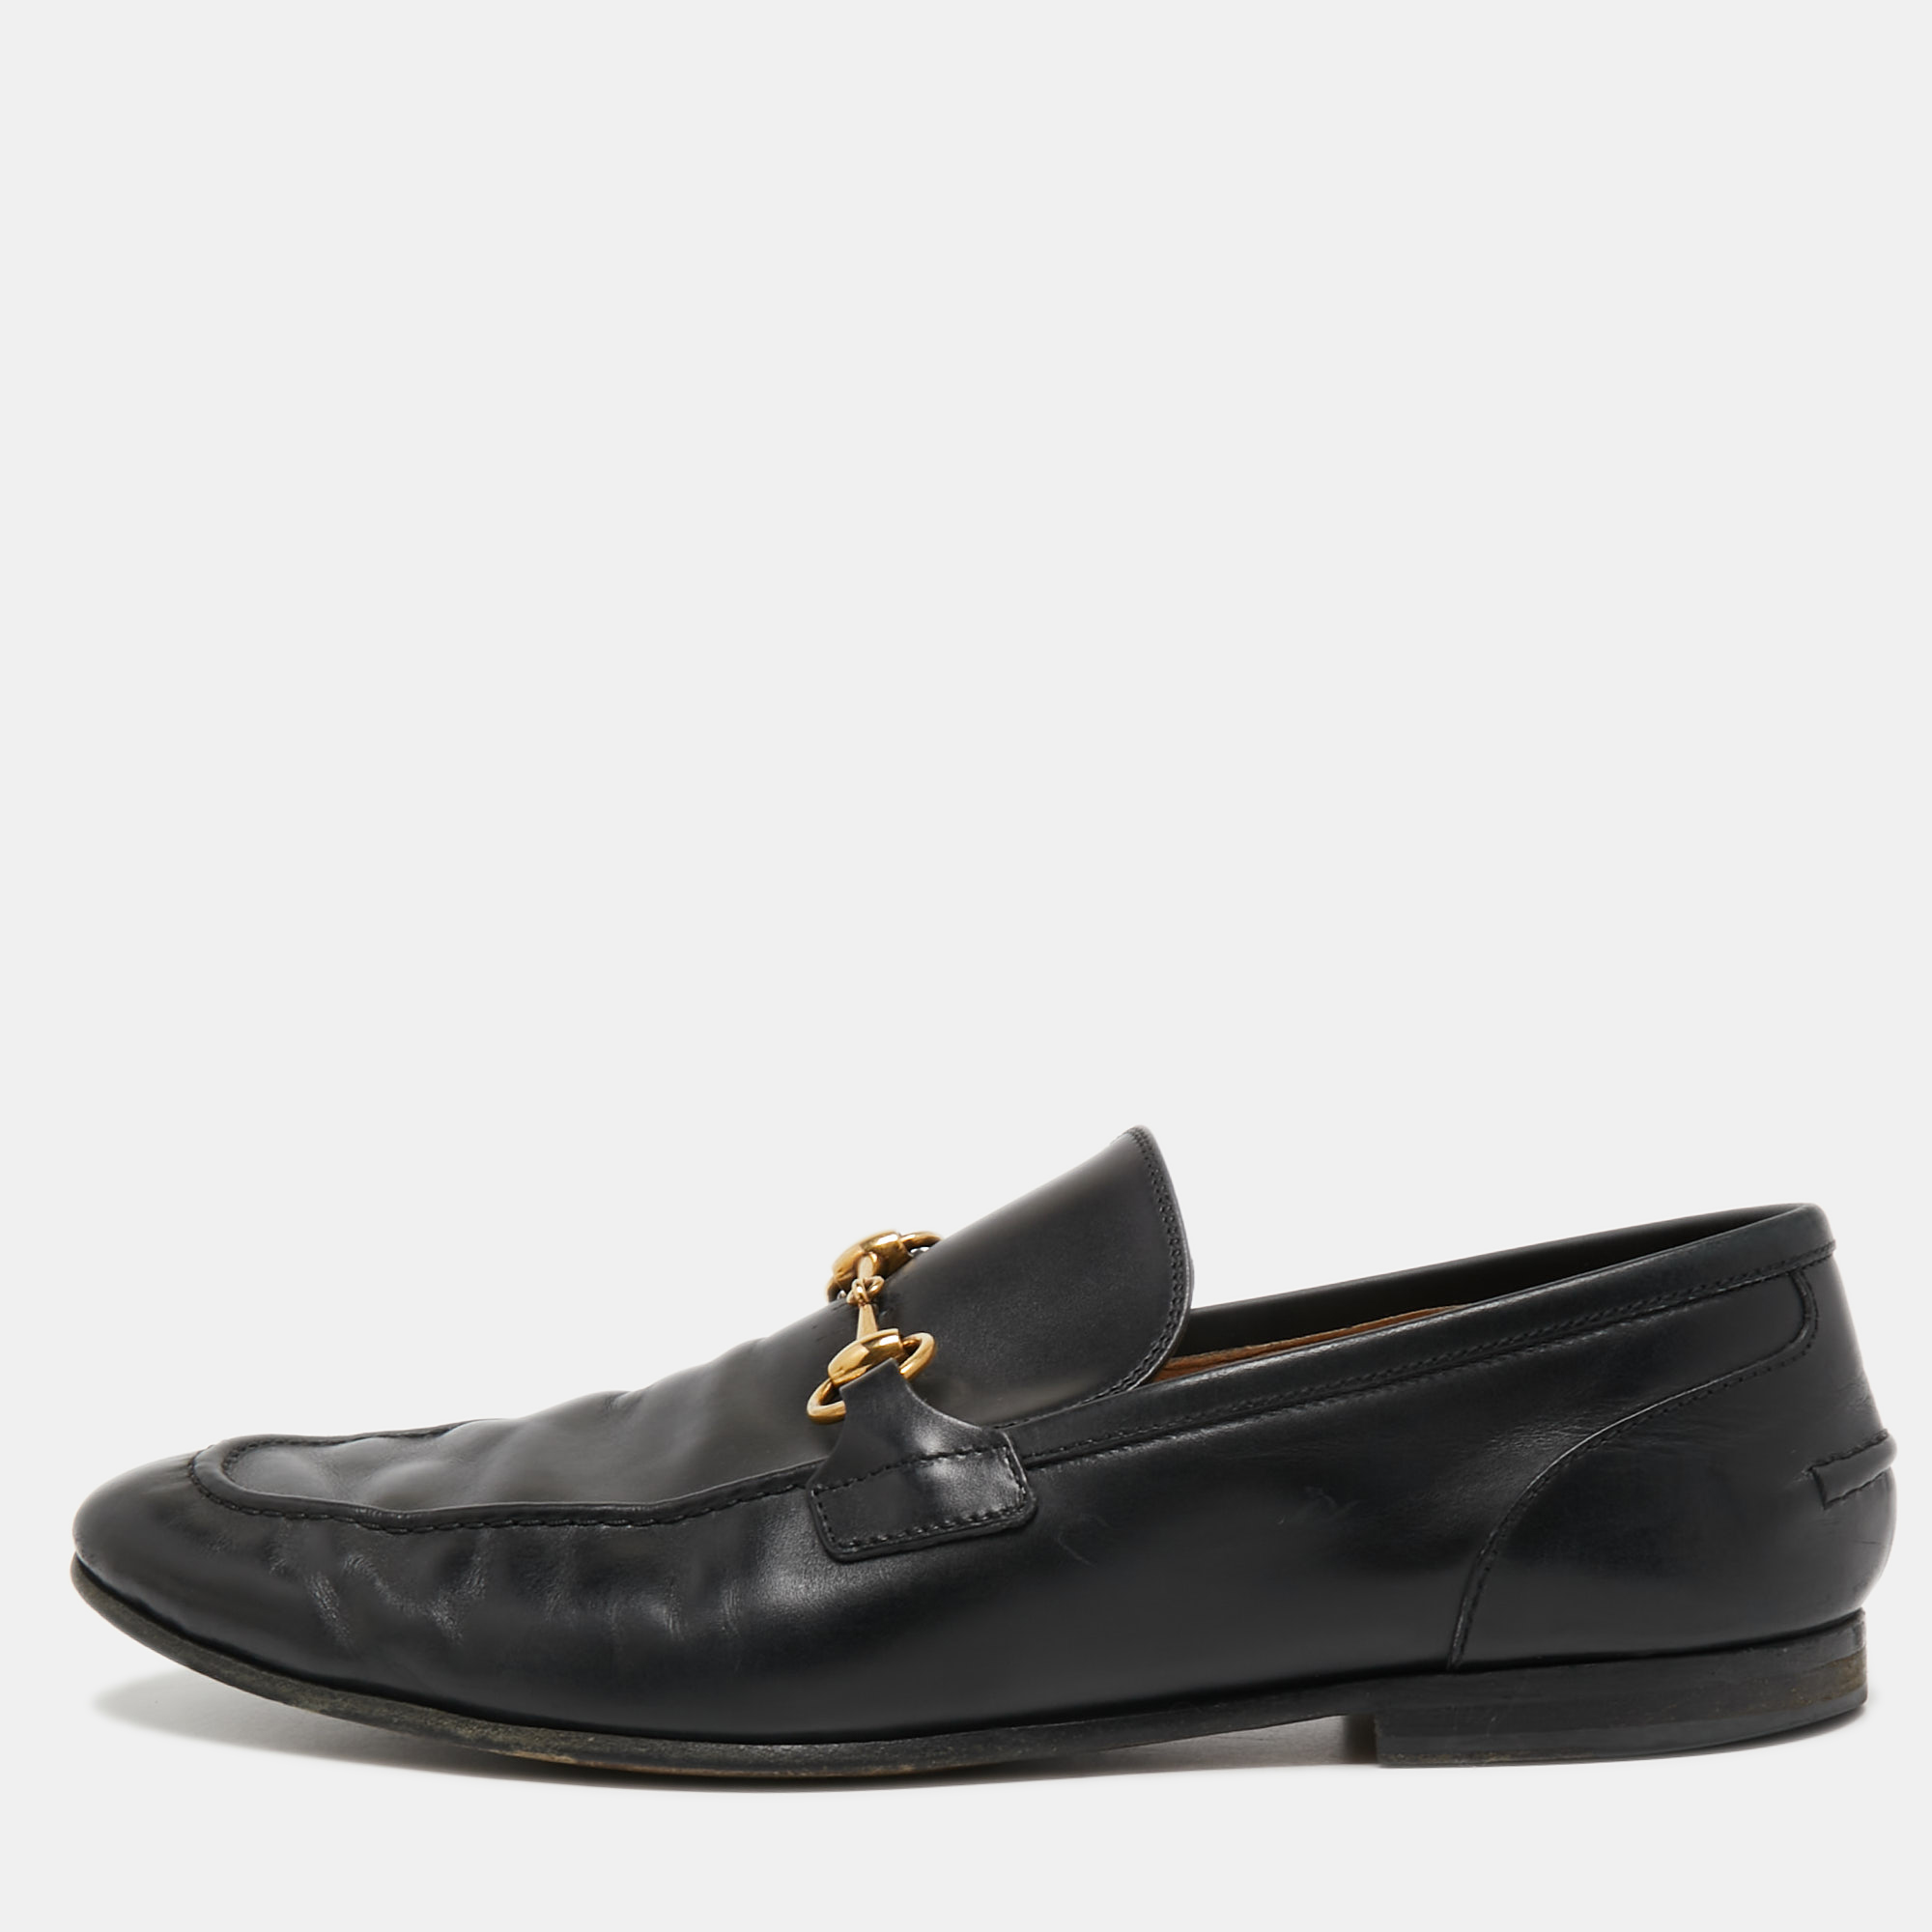 Pre-owned Gucci Black Leather Jordaan Loafers Size 43